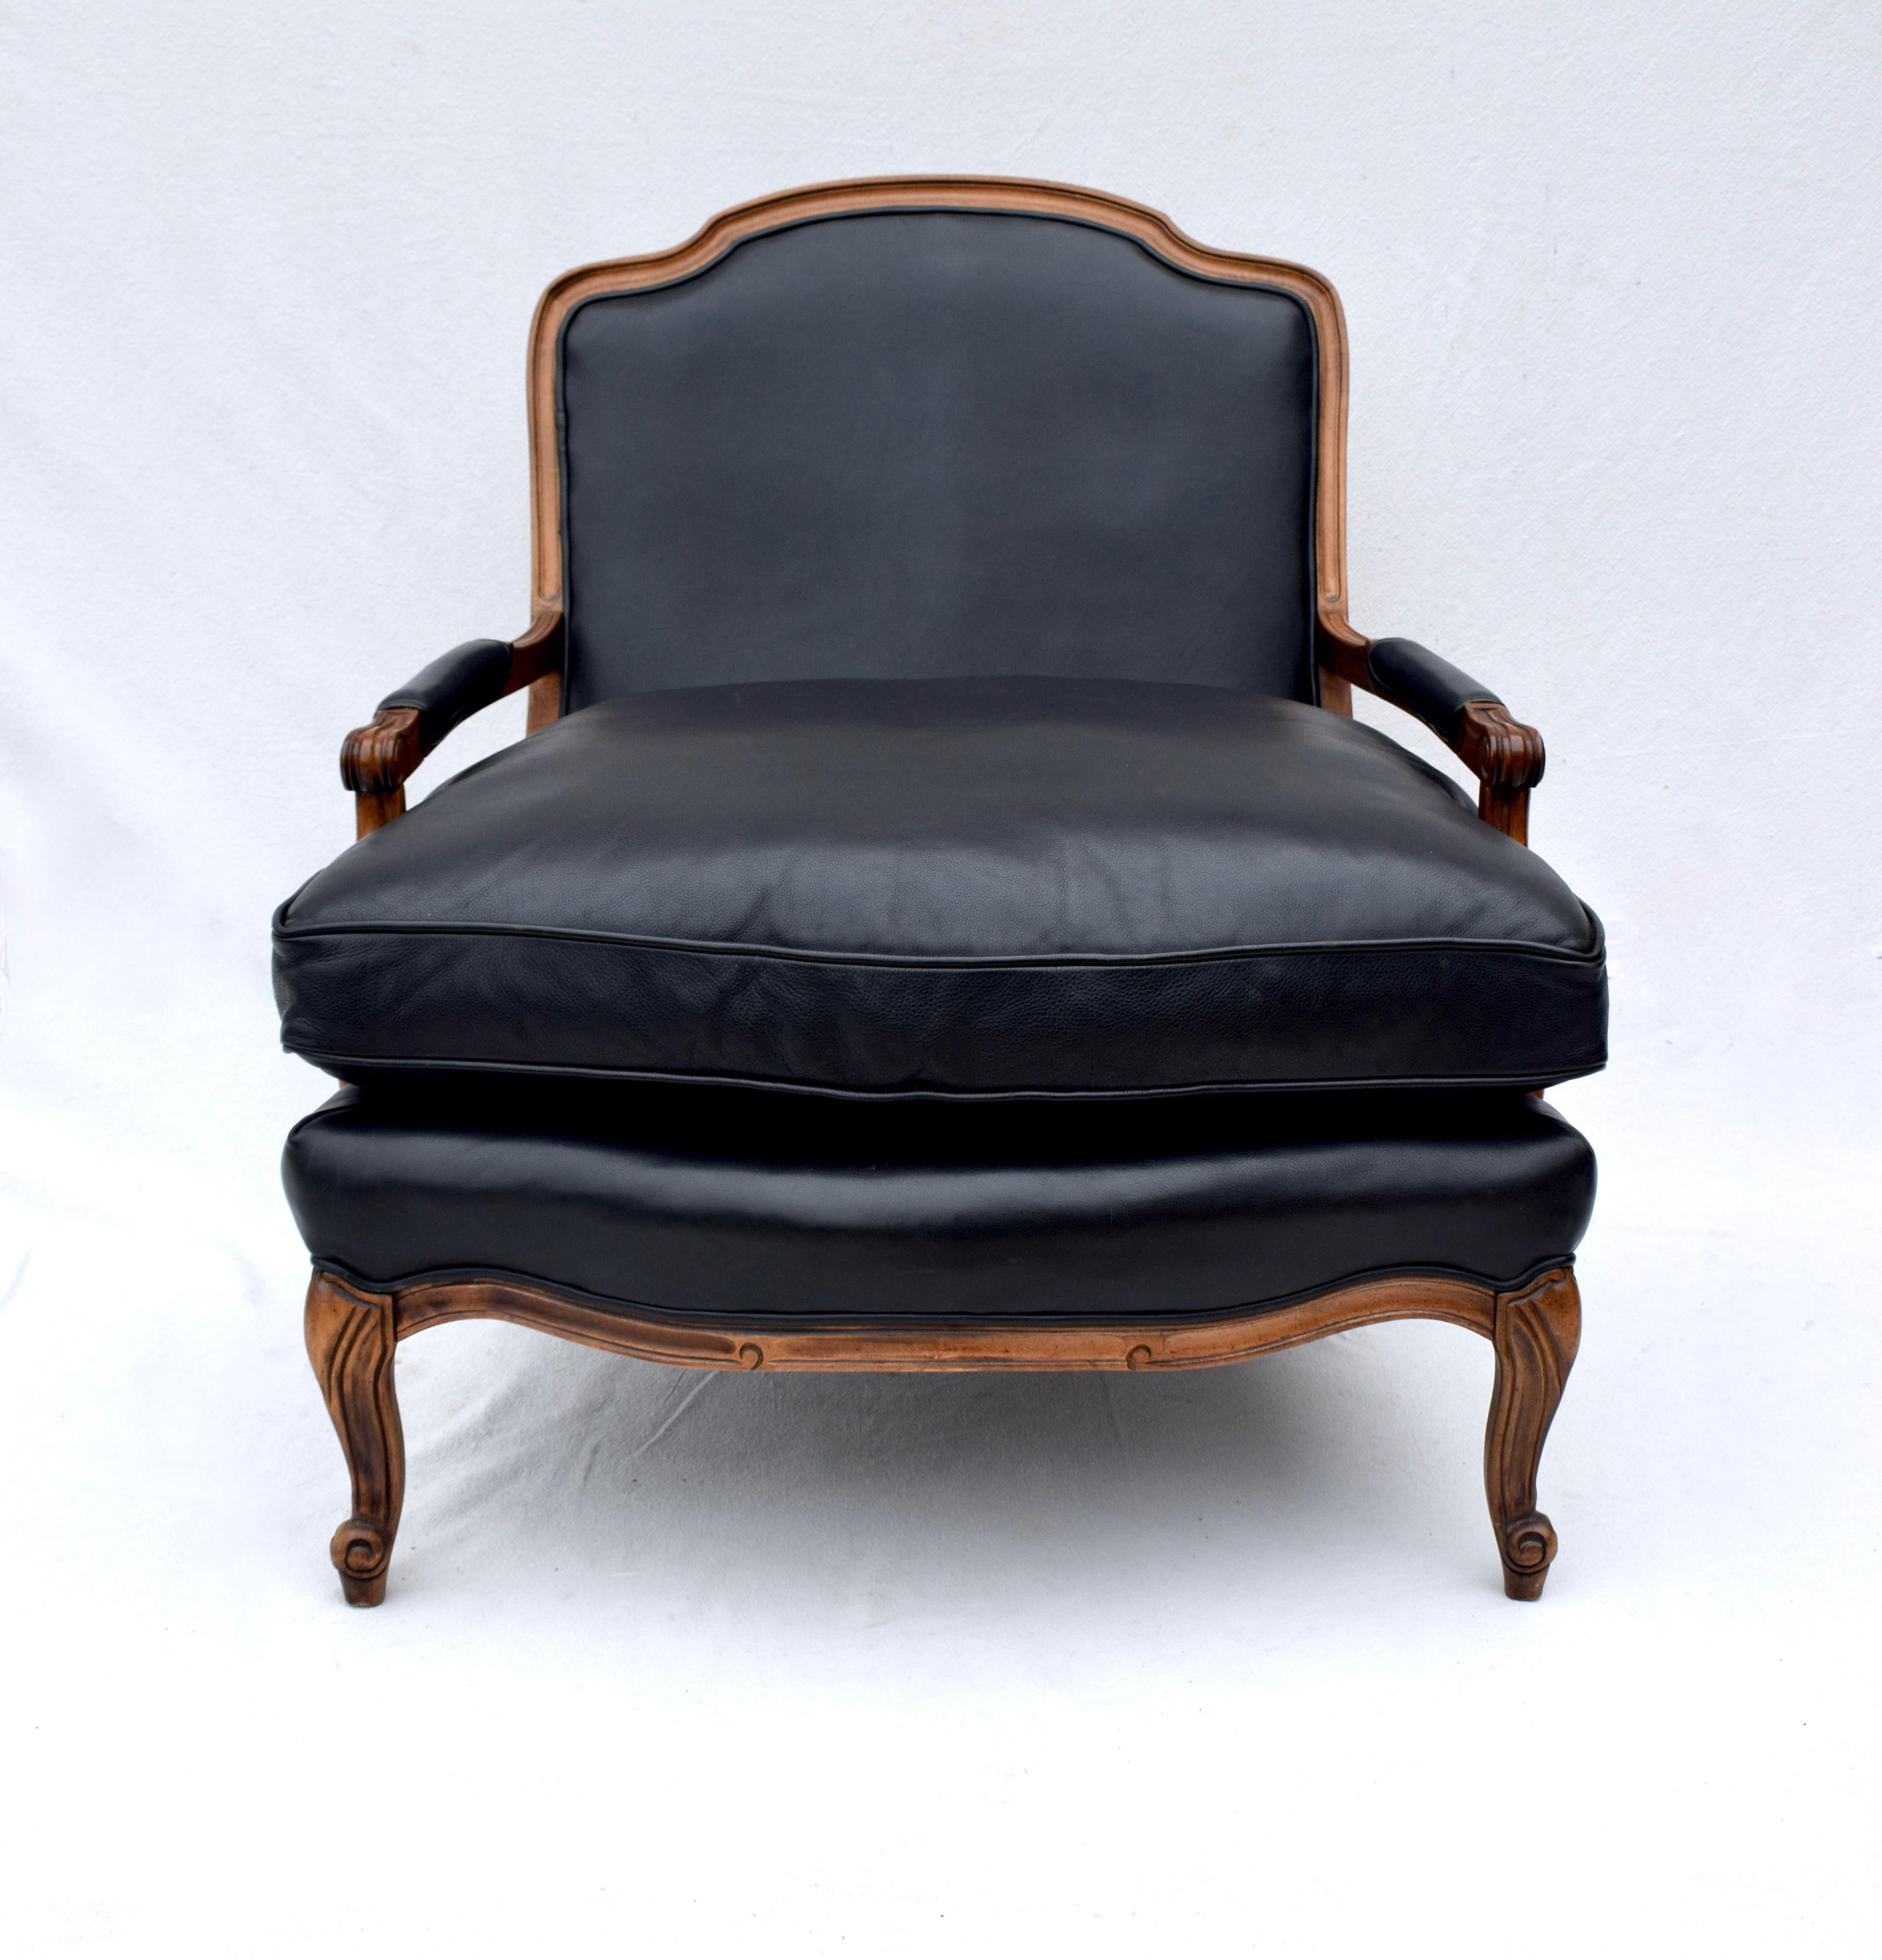 20th Century Woodward & Lothrop Top of the Line Black Leather and Walnut Club Chair & Ottoman